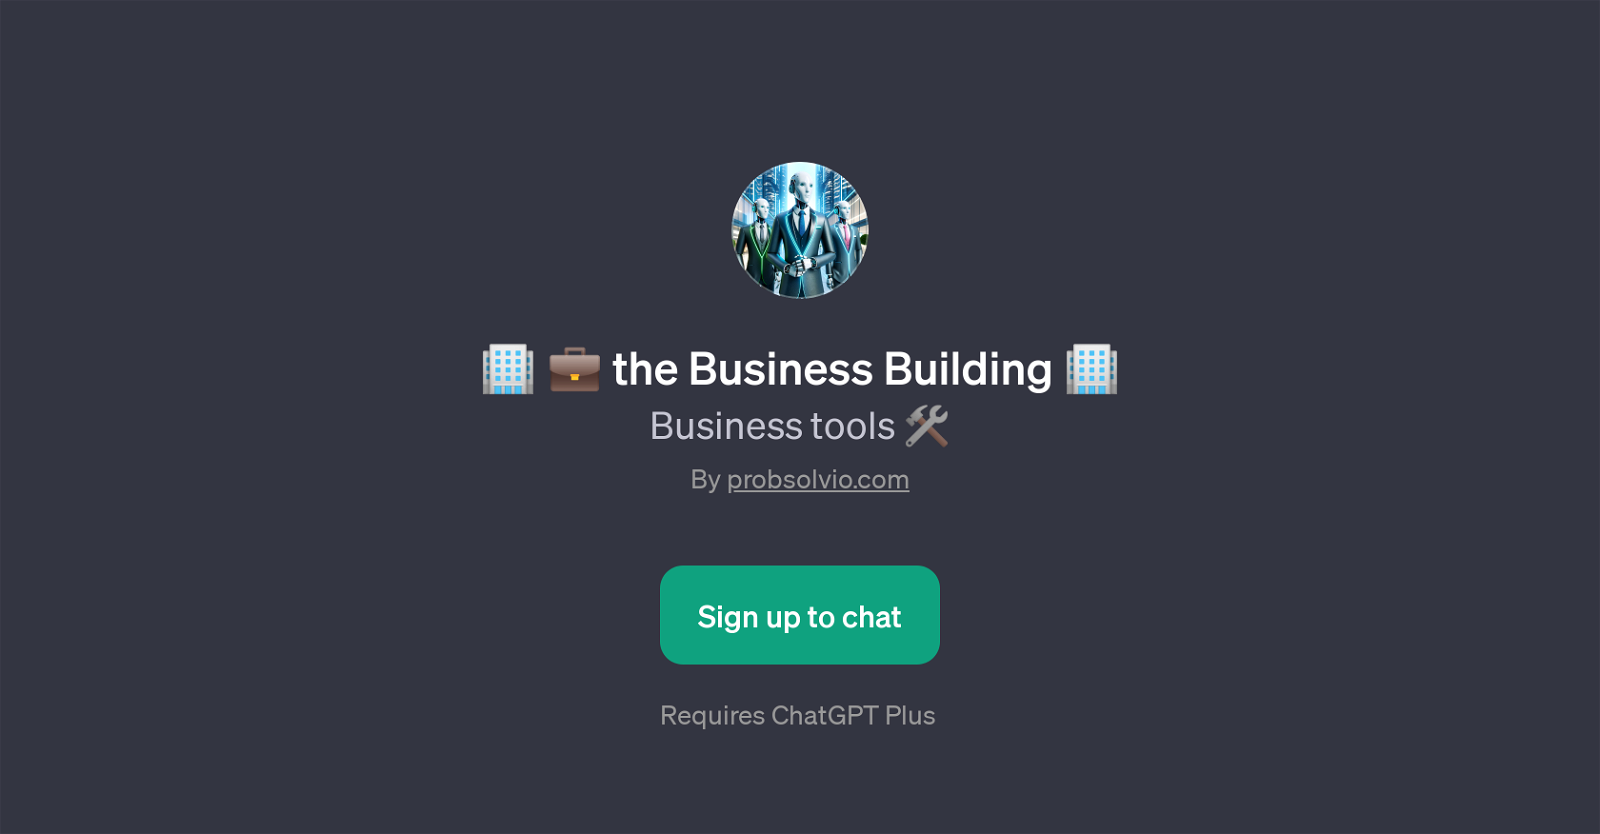 The Business Building website